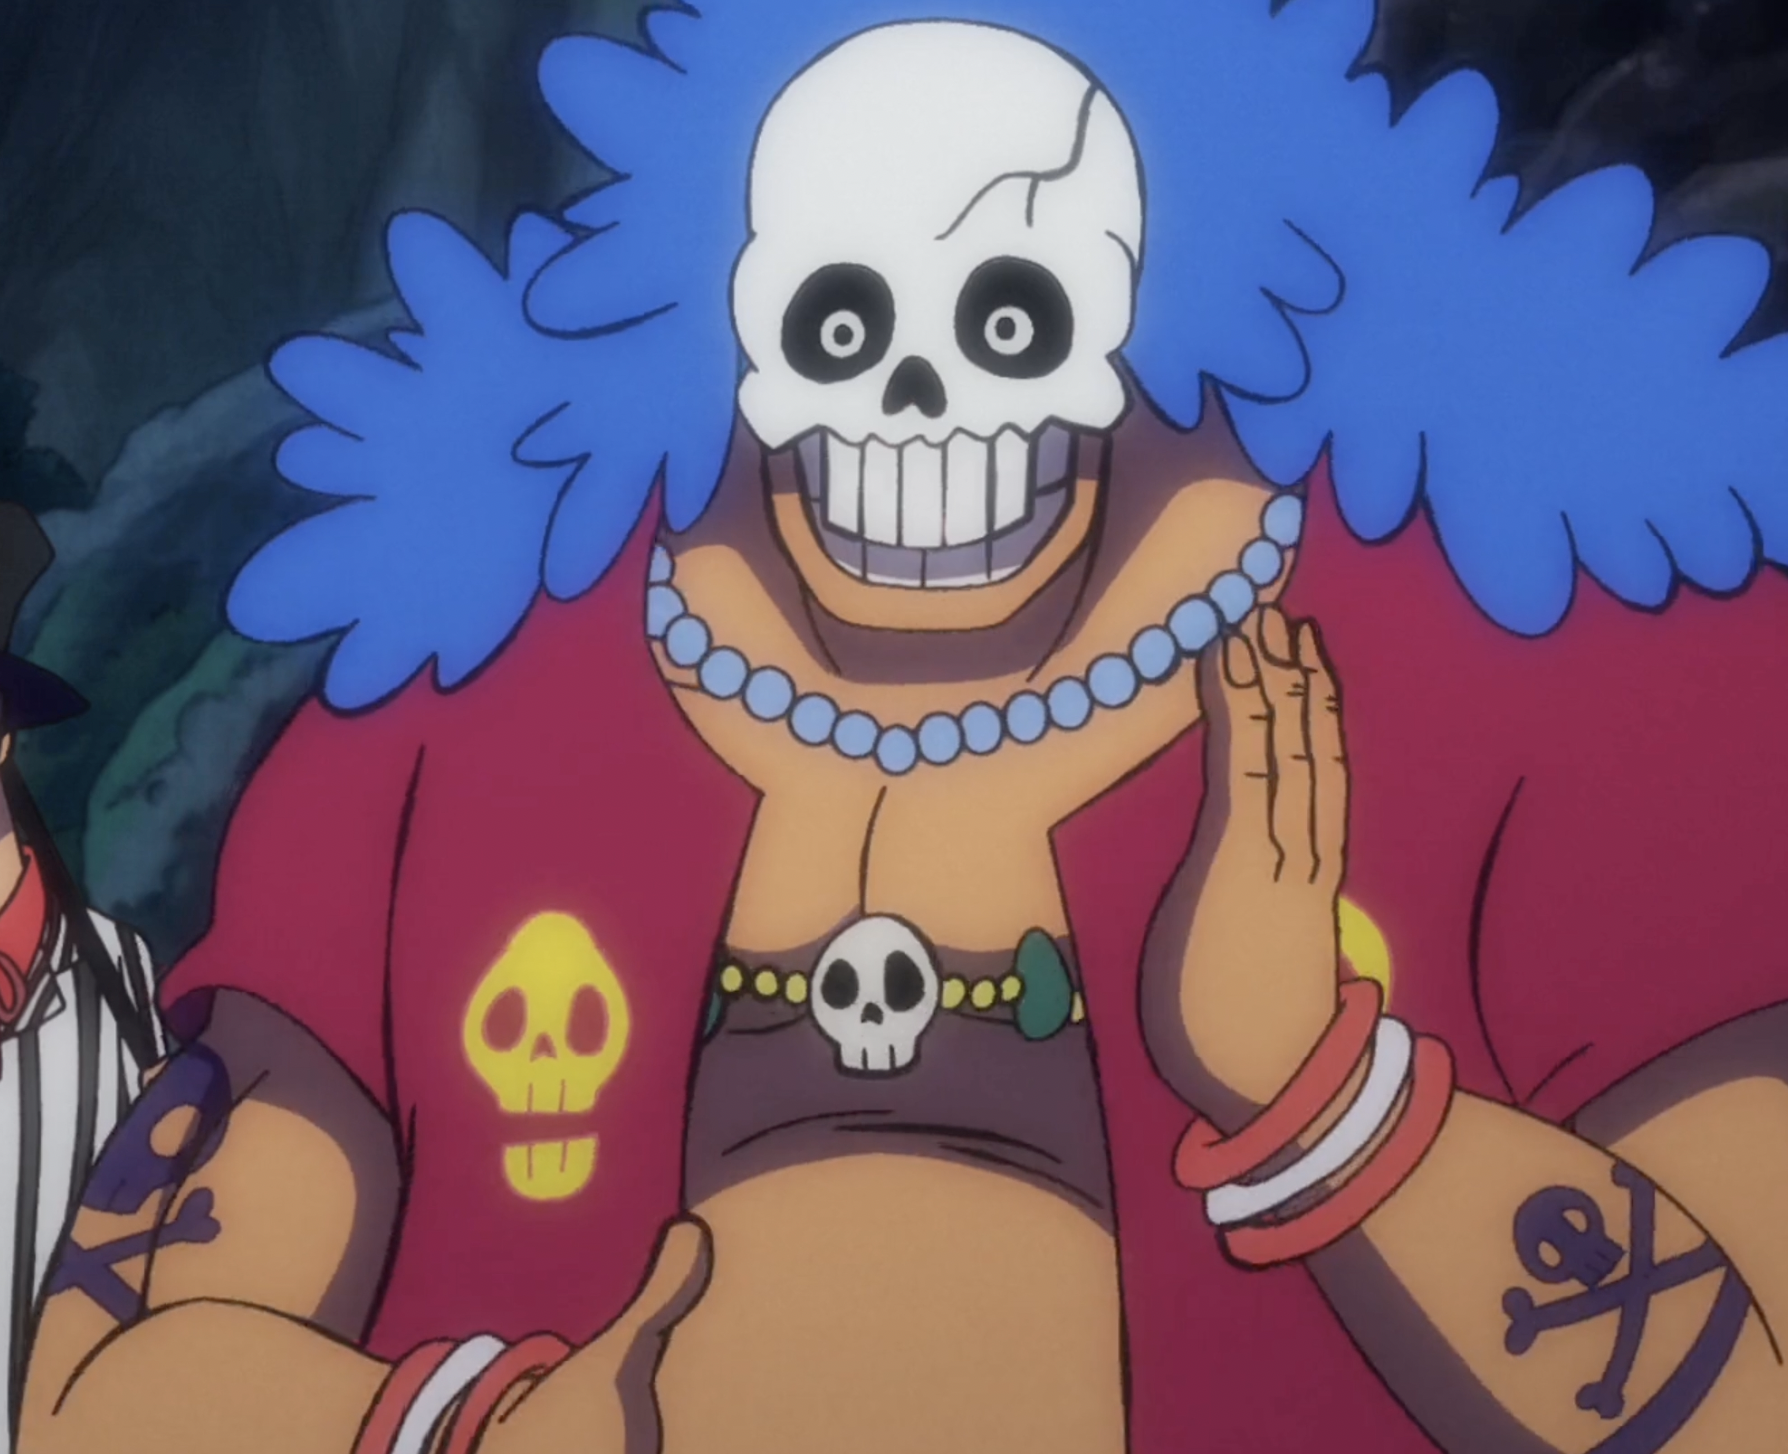 https://static.wikia.nocookie.net/onepiece/images/c/c4/Skull_Anime_Infobox.png/revision/latest?cb=20220306060059